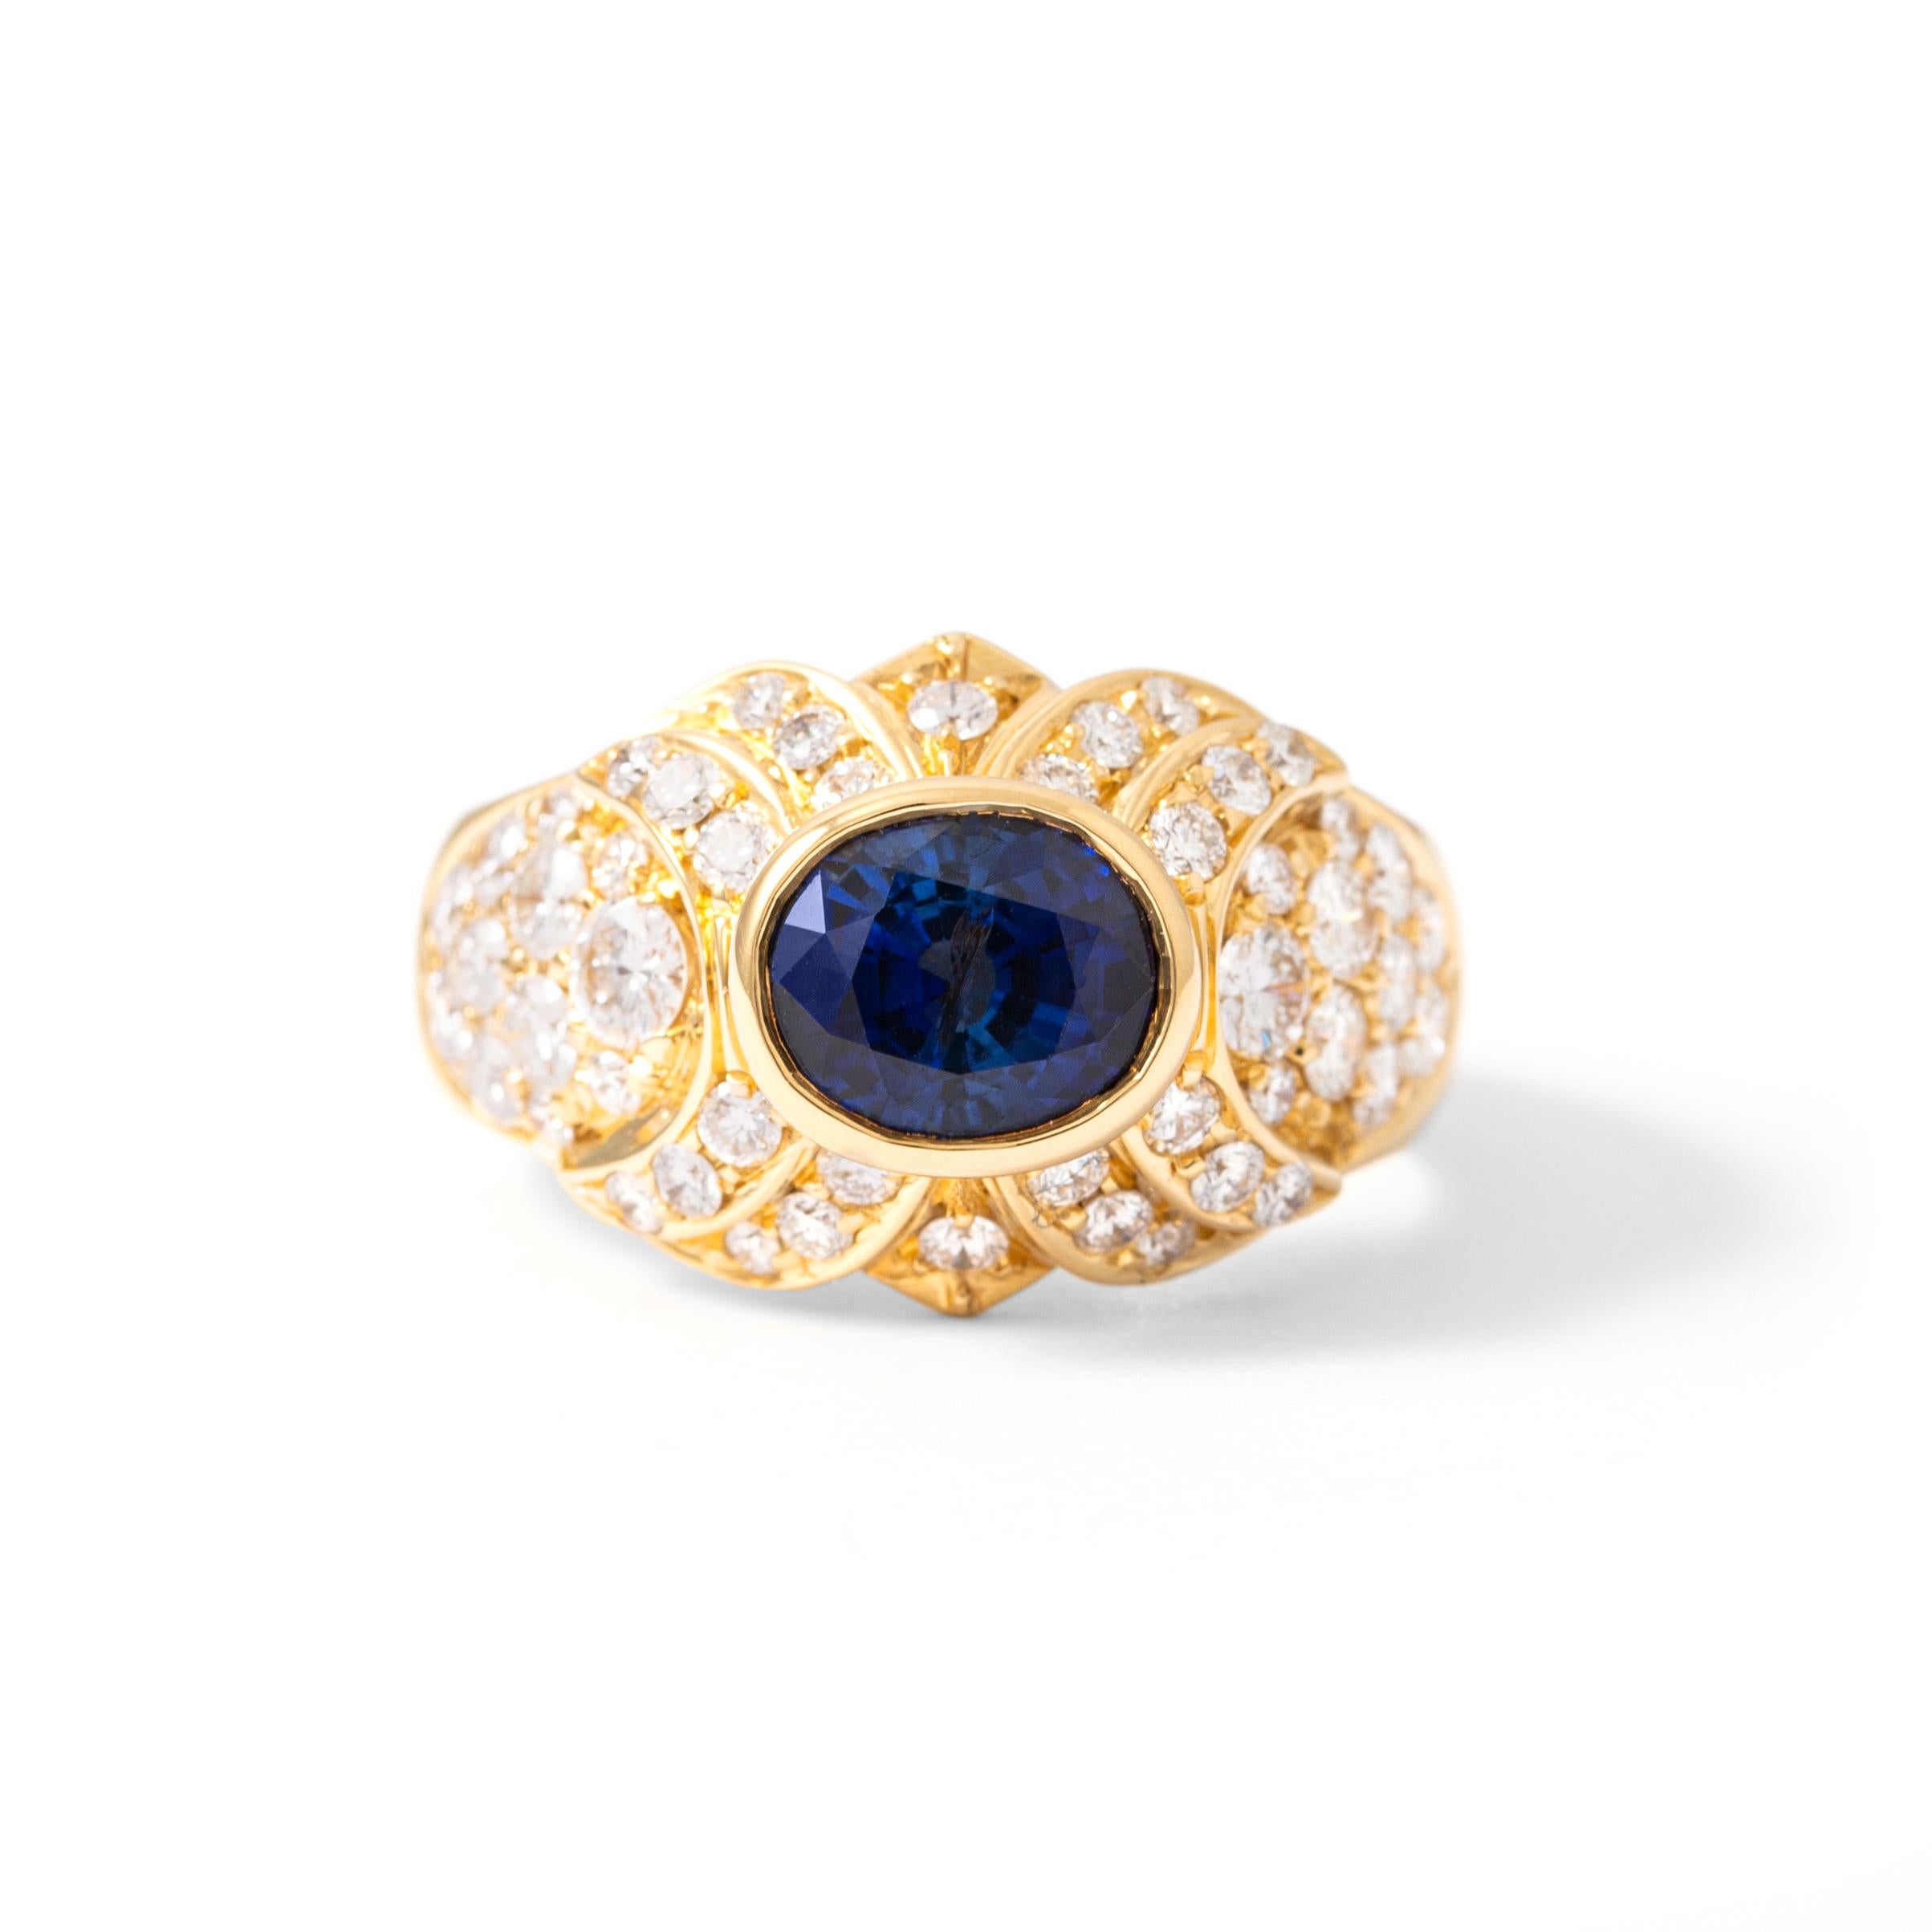 Ring in 18kt yellow gold set with one oval cut sapphire 2.11 cts and 50 diamonds 1.05 cts Size 52      